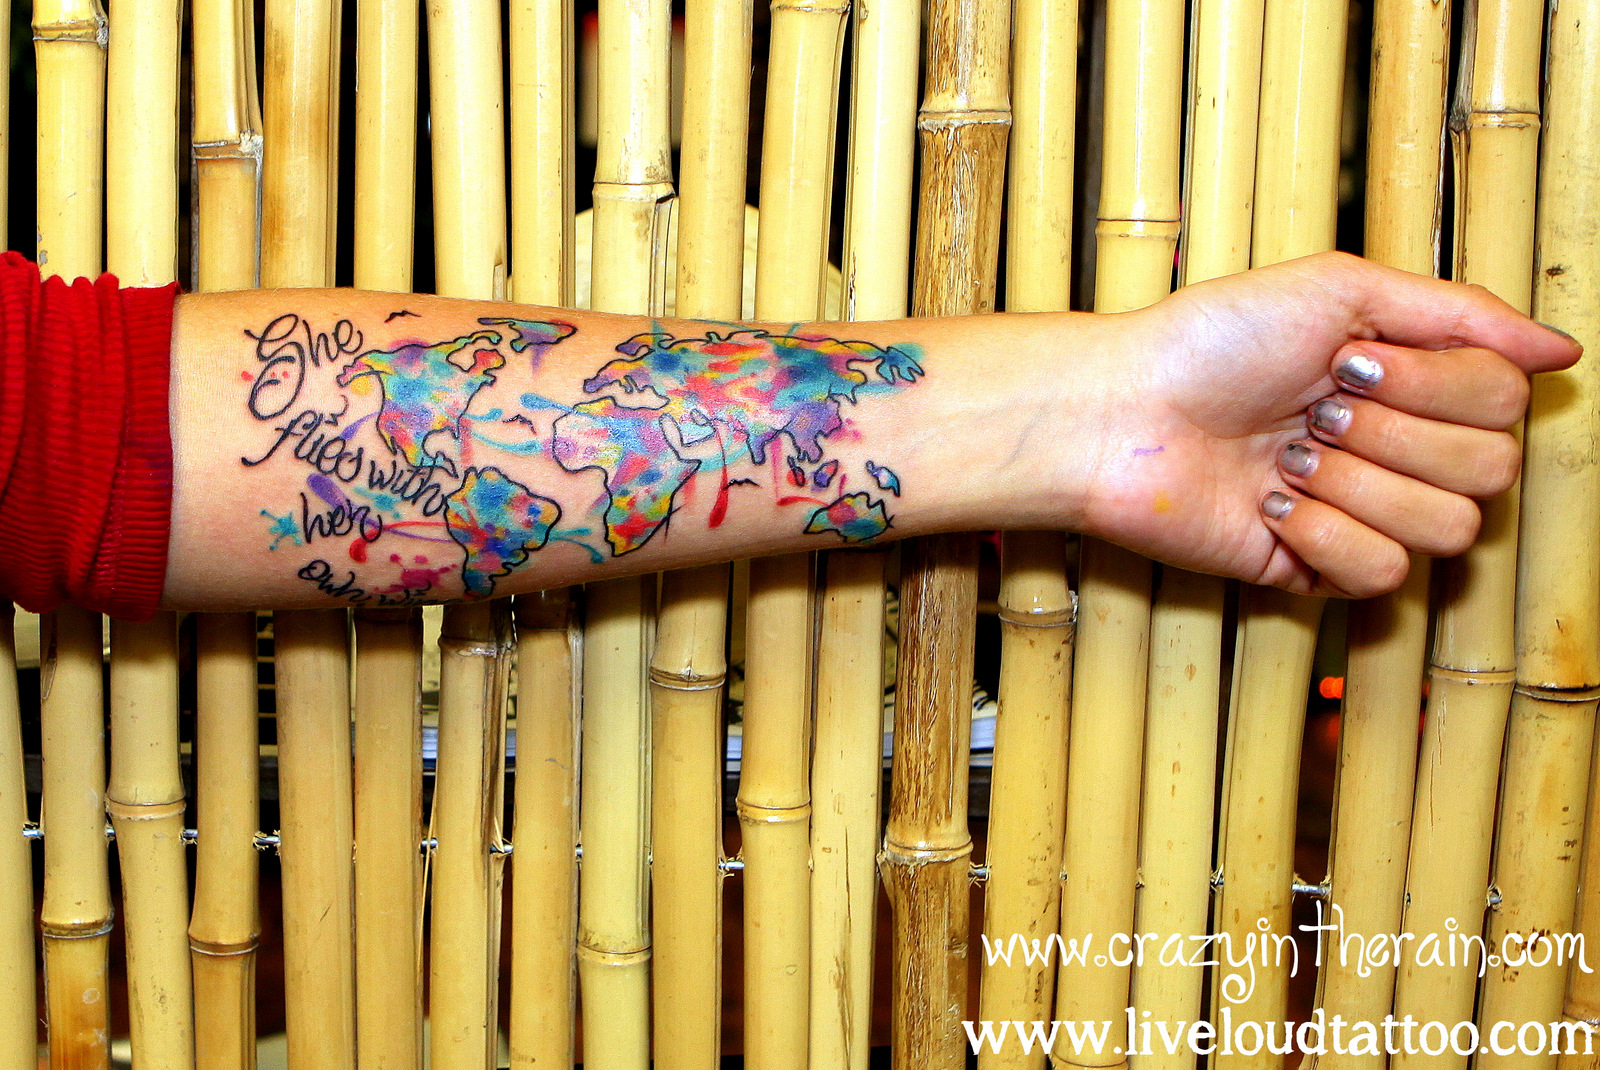 She Flies With Her Own Wings - Colorful World Map Tattoo On Forearm